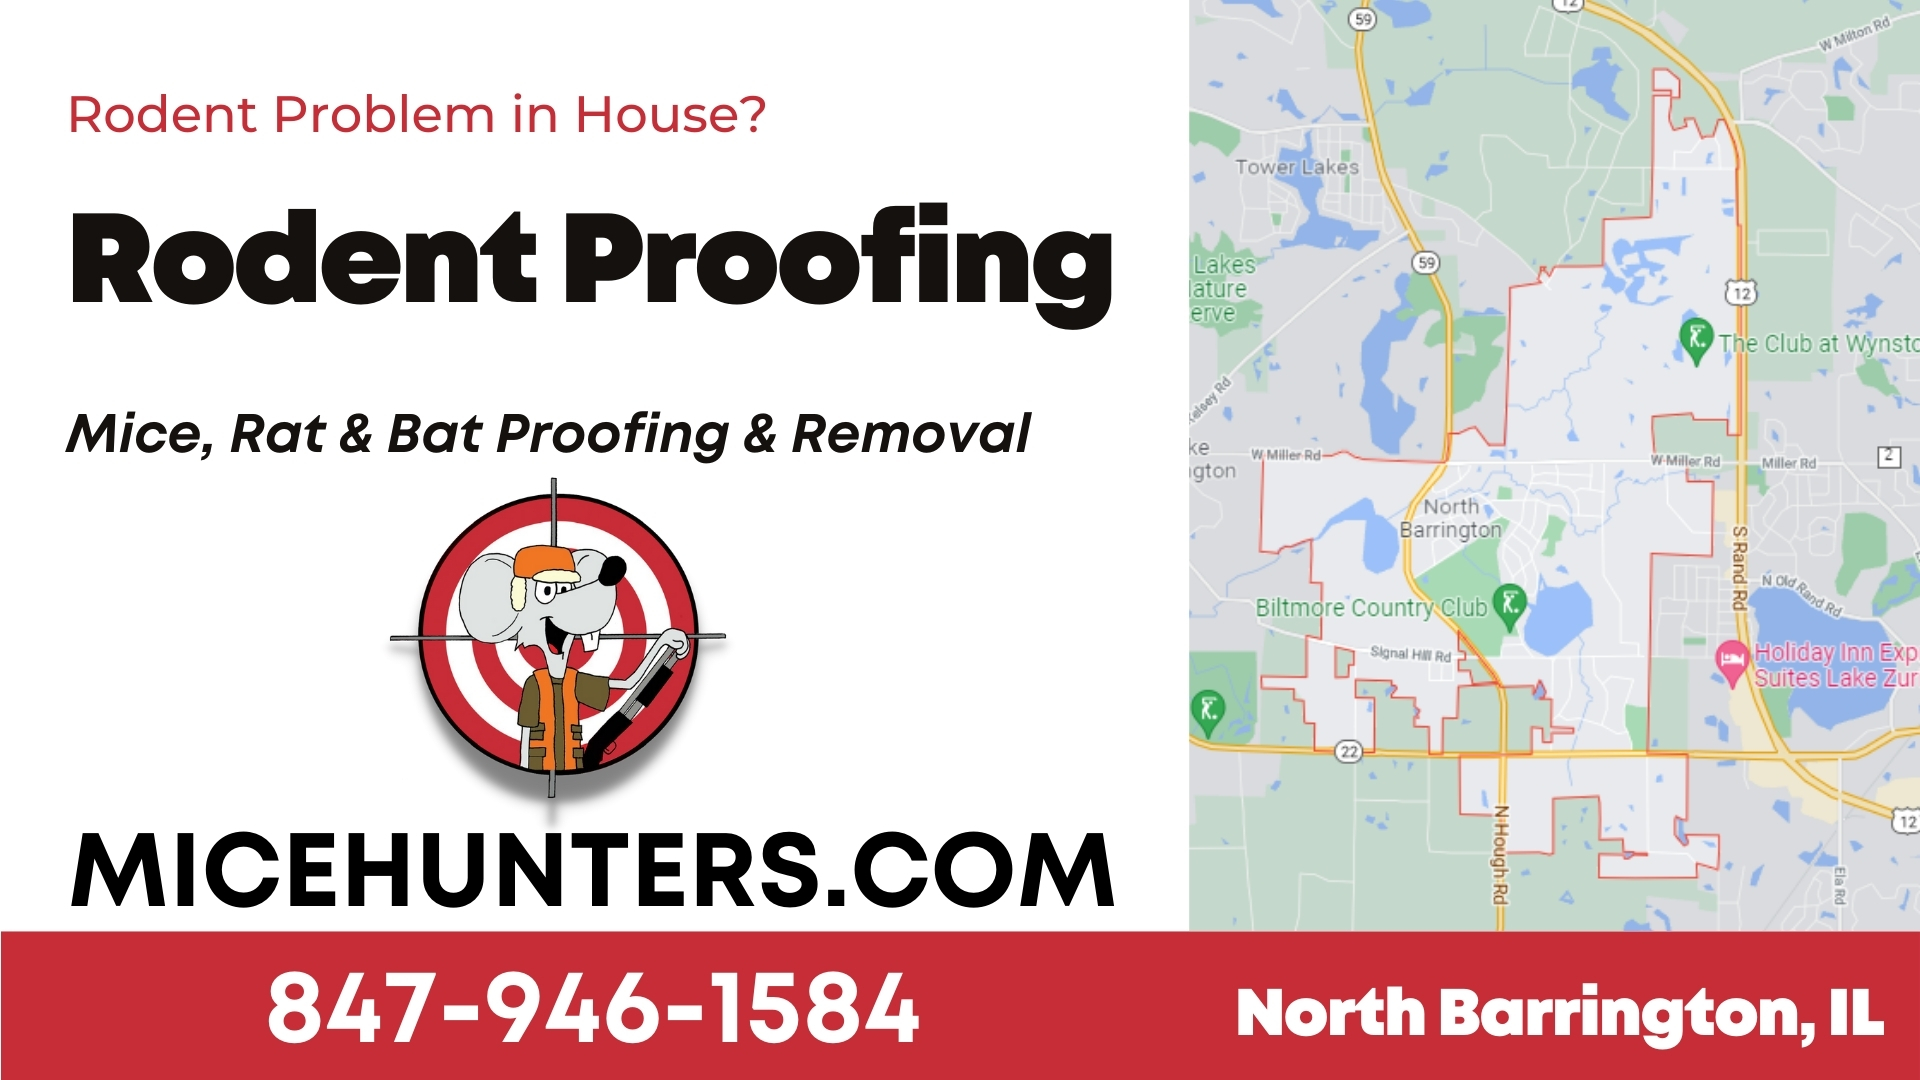 North Barrington Rodent and Mice Proofing Exterminator